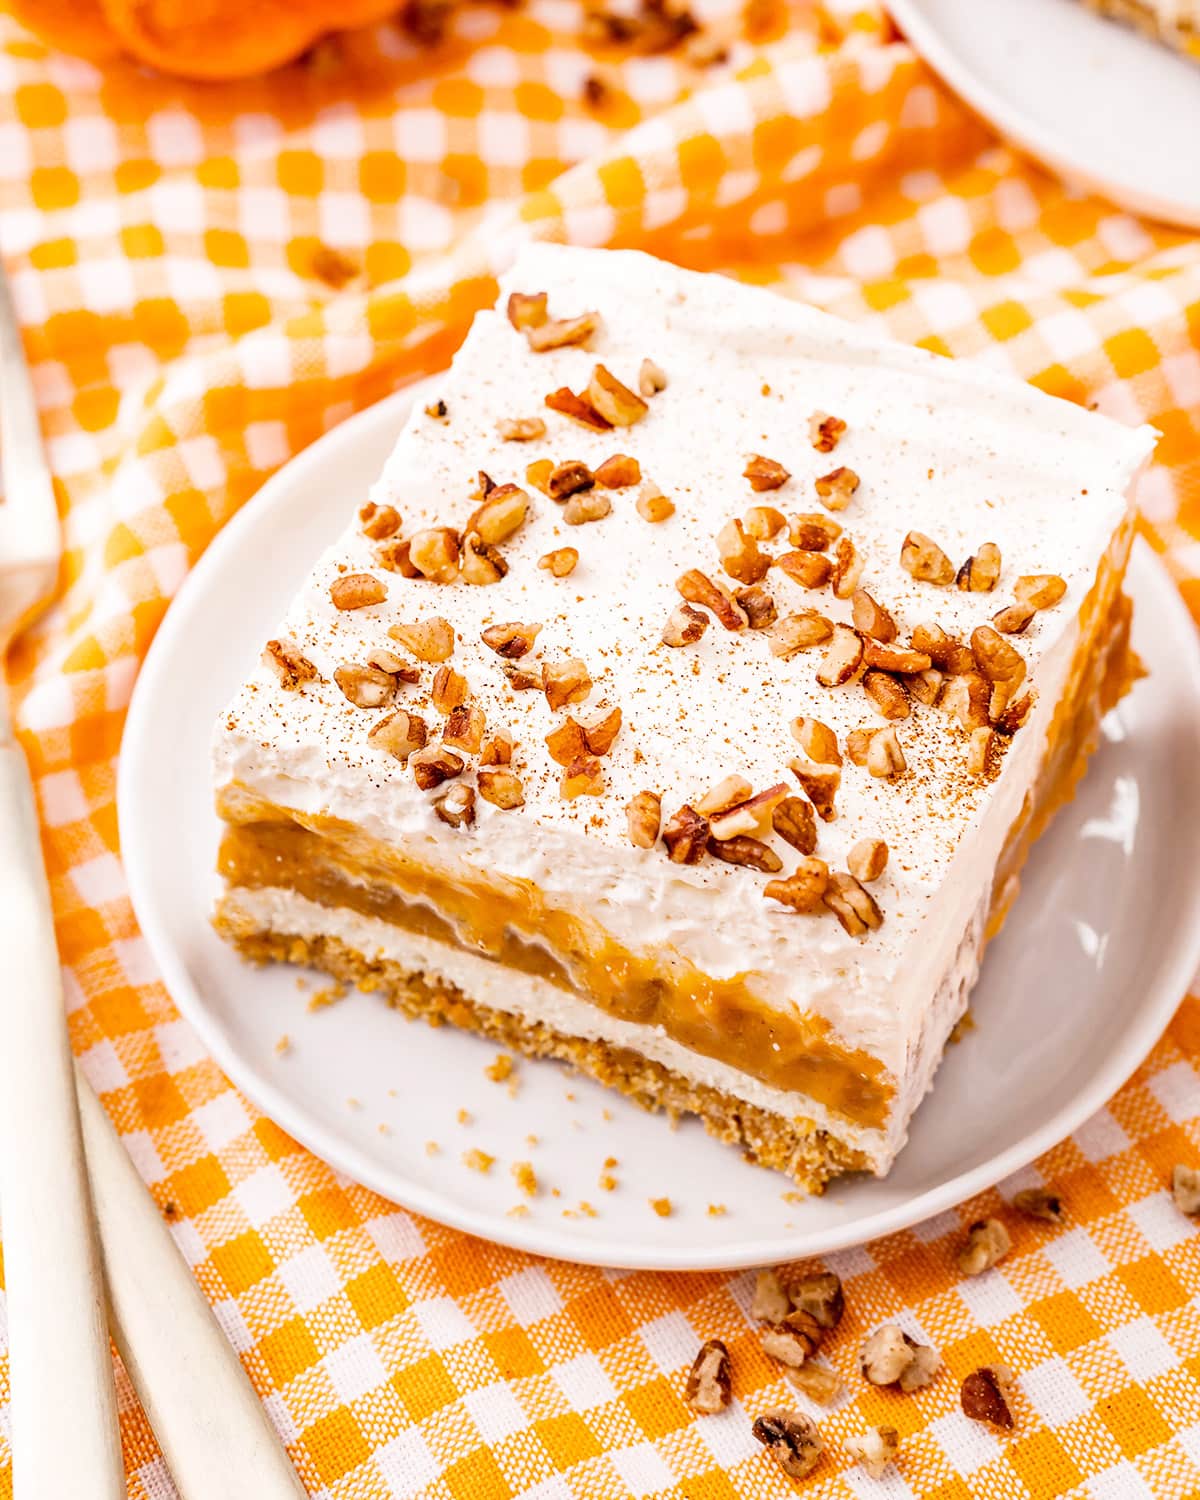 A piece of pumpkin delight on a white plate.